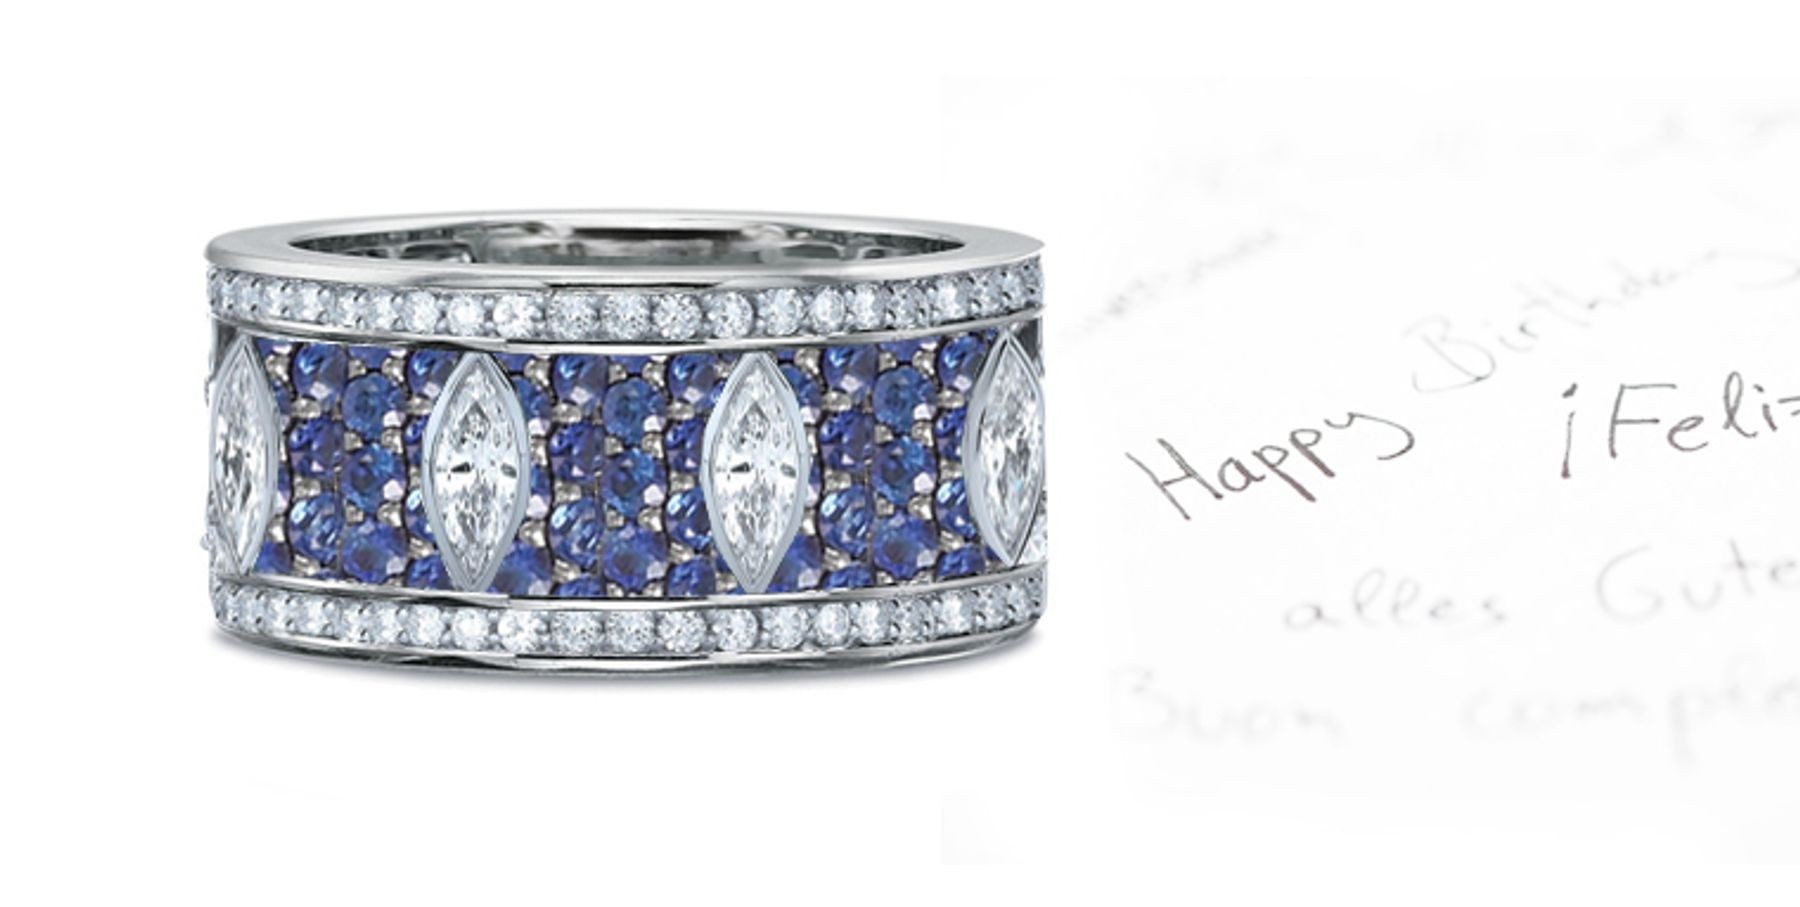 6 mm Wide Sapphire Marquise Pattern Diamond Filled Ring